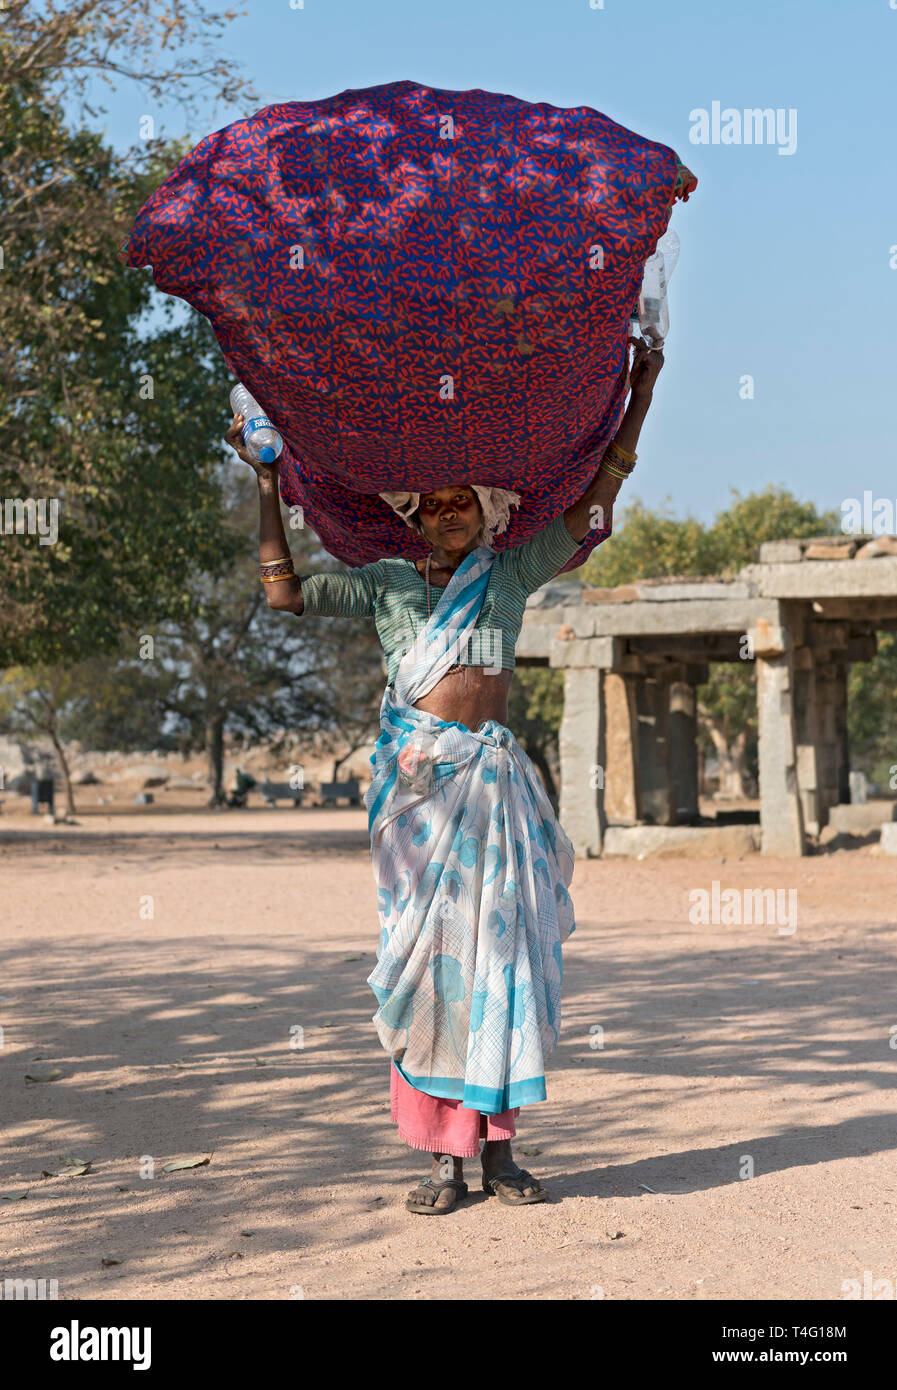 Woman carries heavy load on her head, Hampi, India Stock Photo